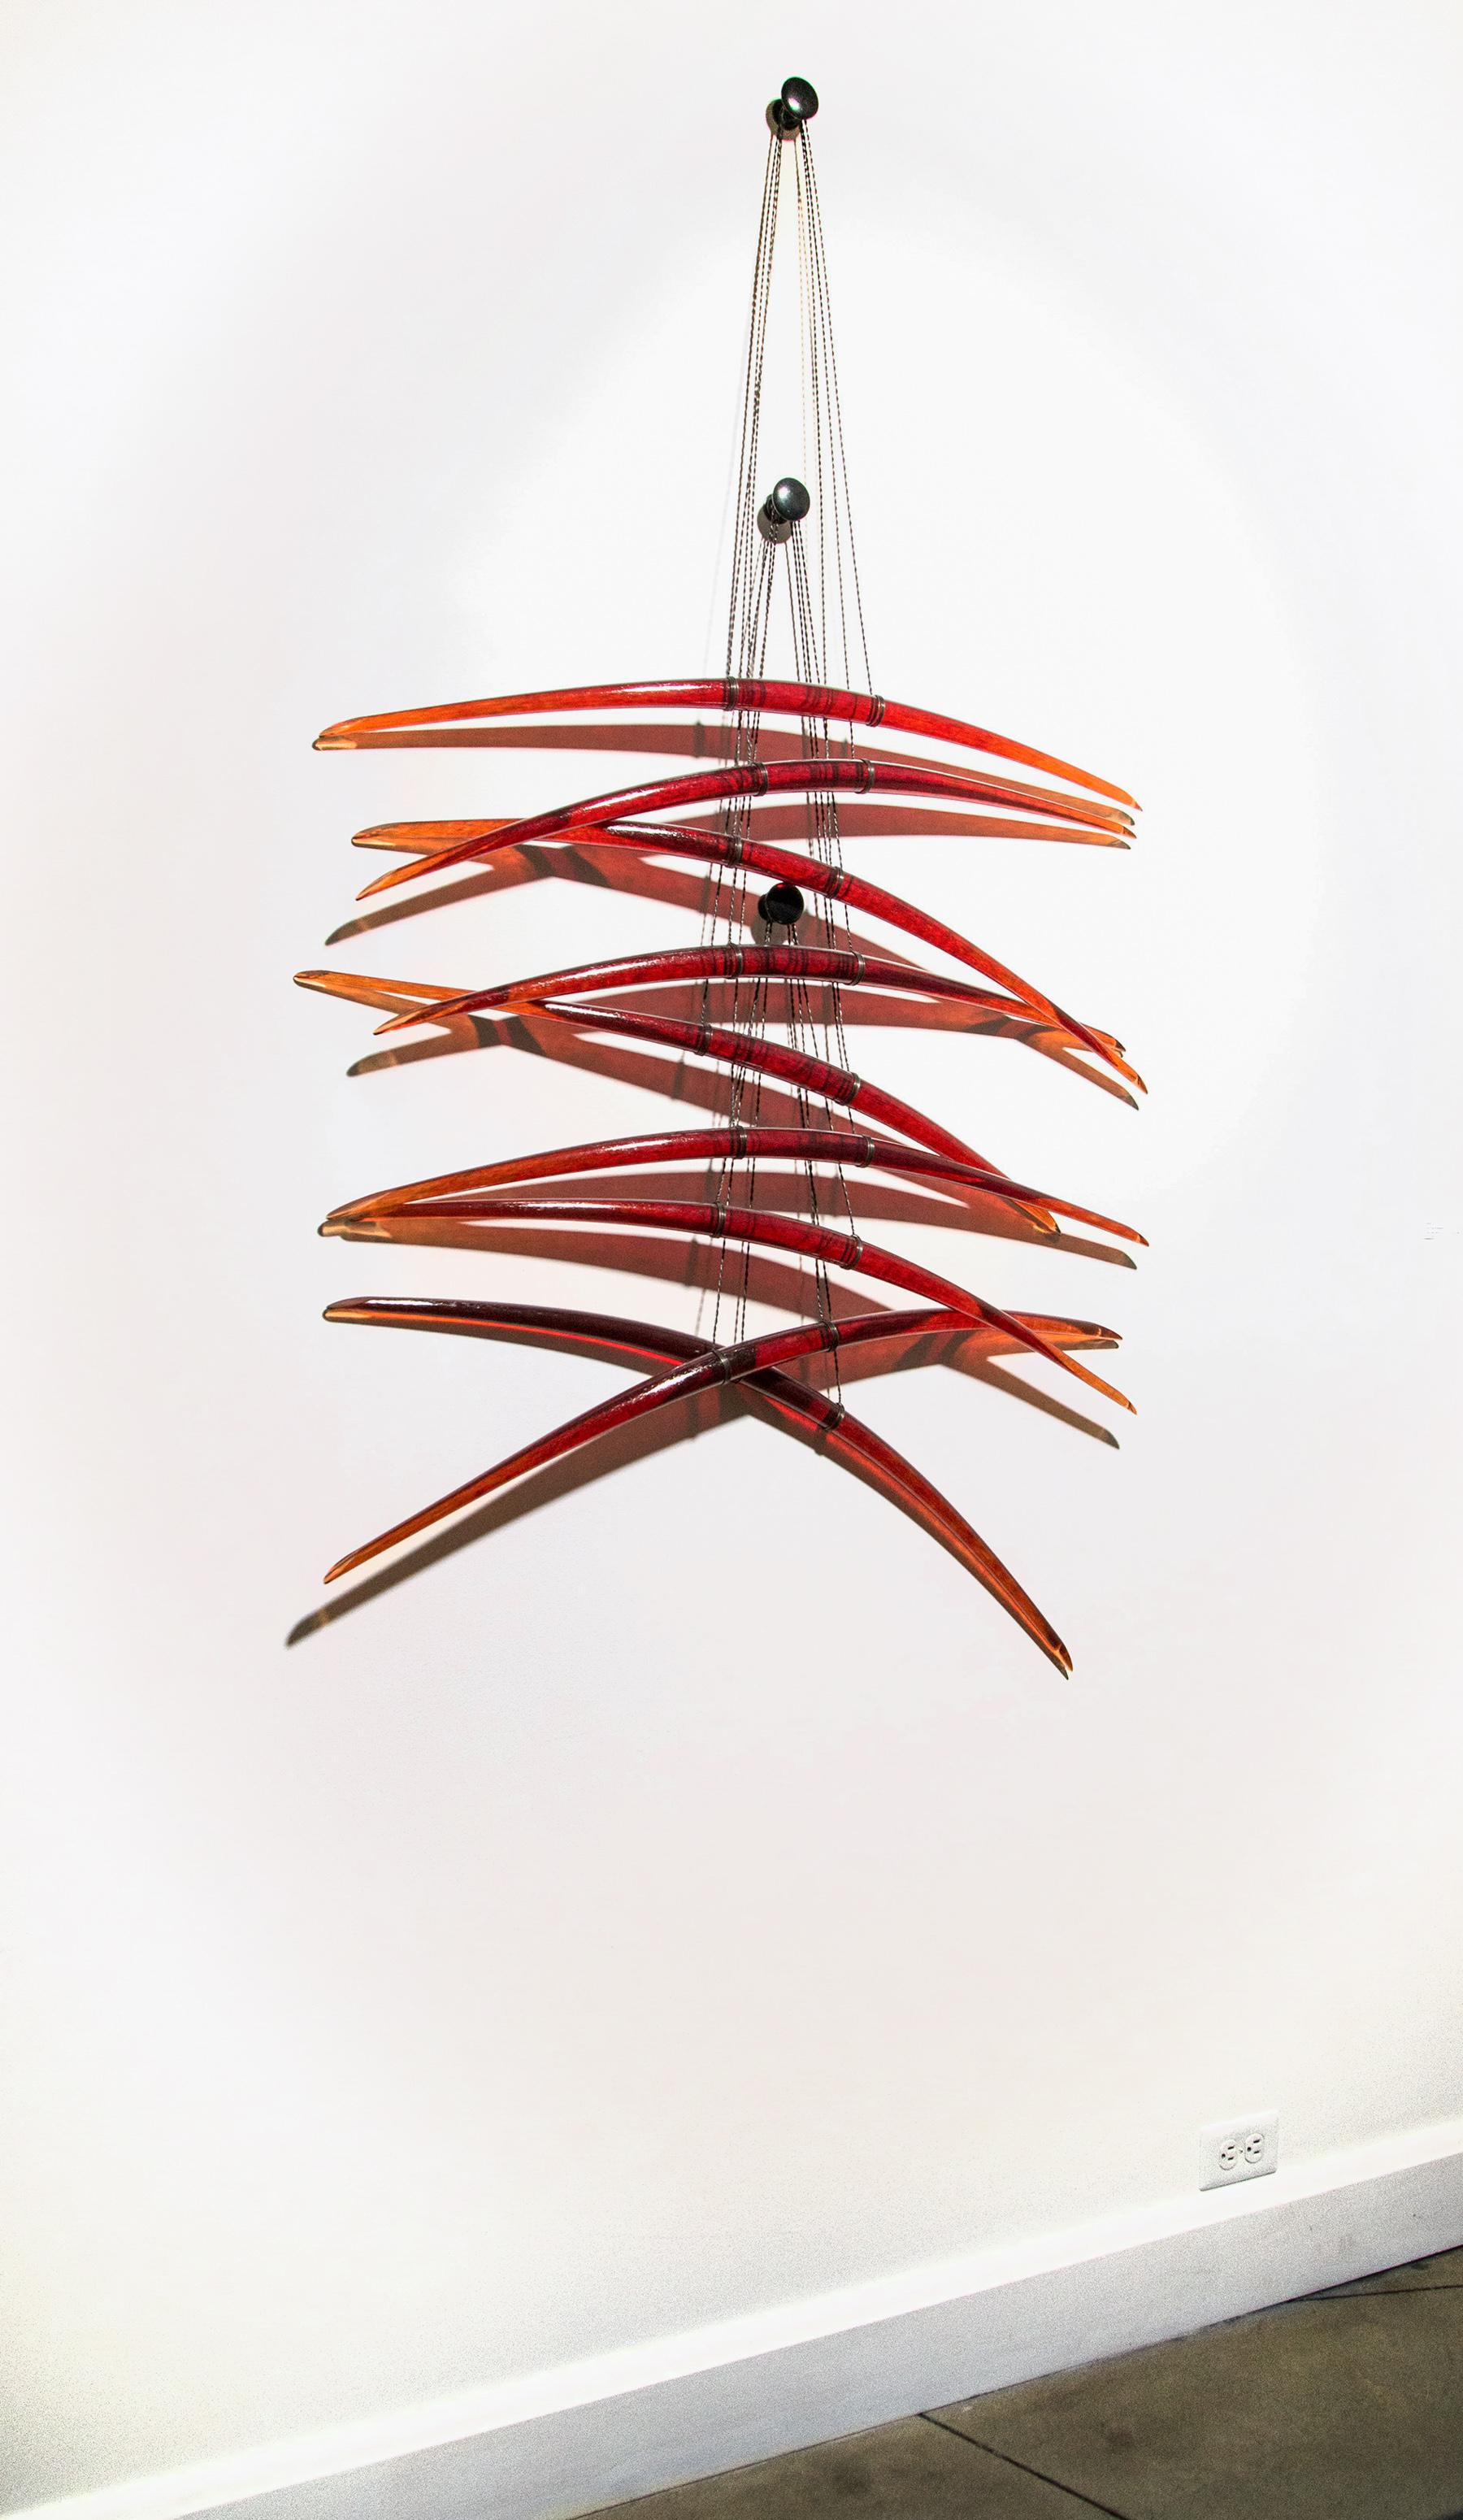 Elegantly curved deep red glass pieces in twos are suspended on fine black steel cables in this dramatic new wall sculpture by Canadian artist John Paul Robinson. His glass work is inspired by nature’s elements—earth, wind, fire and water. The